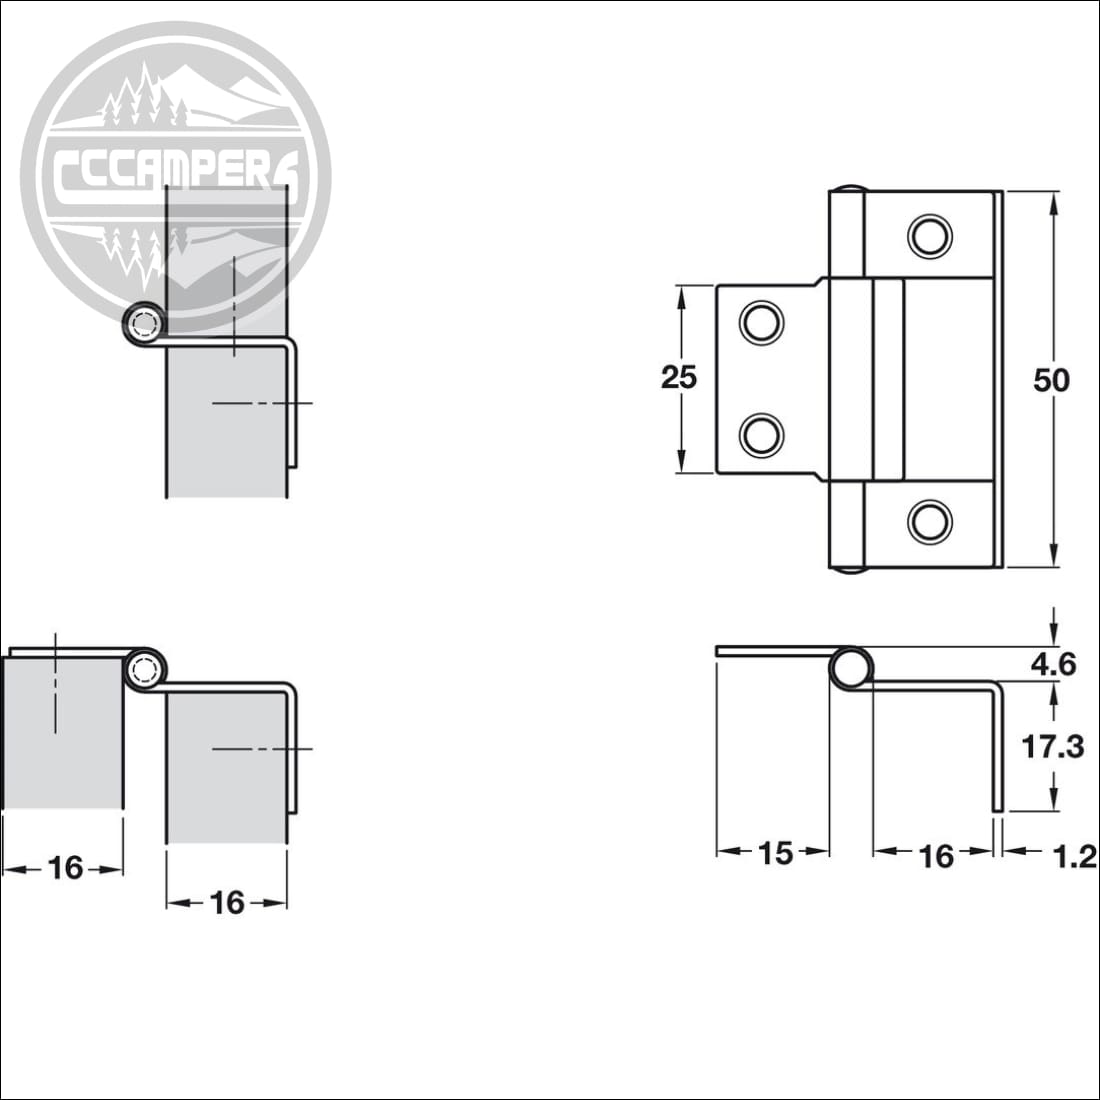 Flush Hinge for 15-16 mm Door Thickness - cccampers.myshopify.com